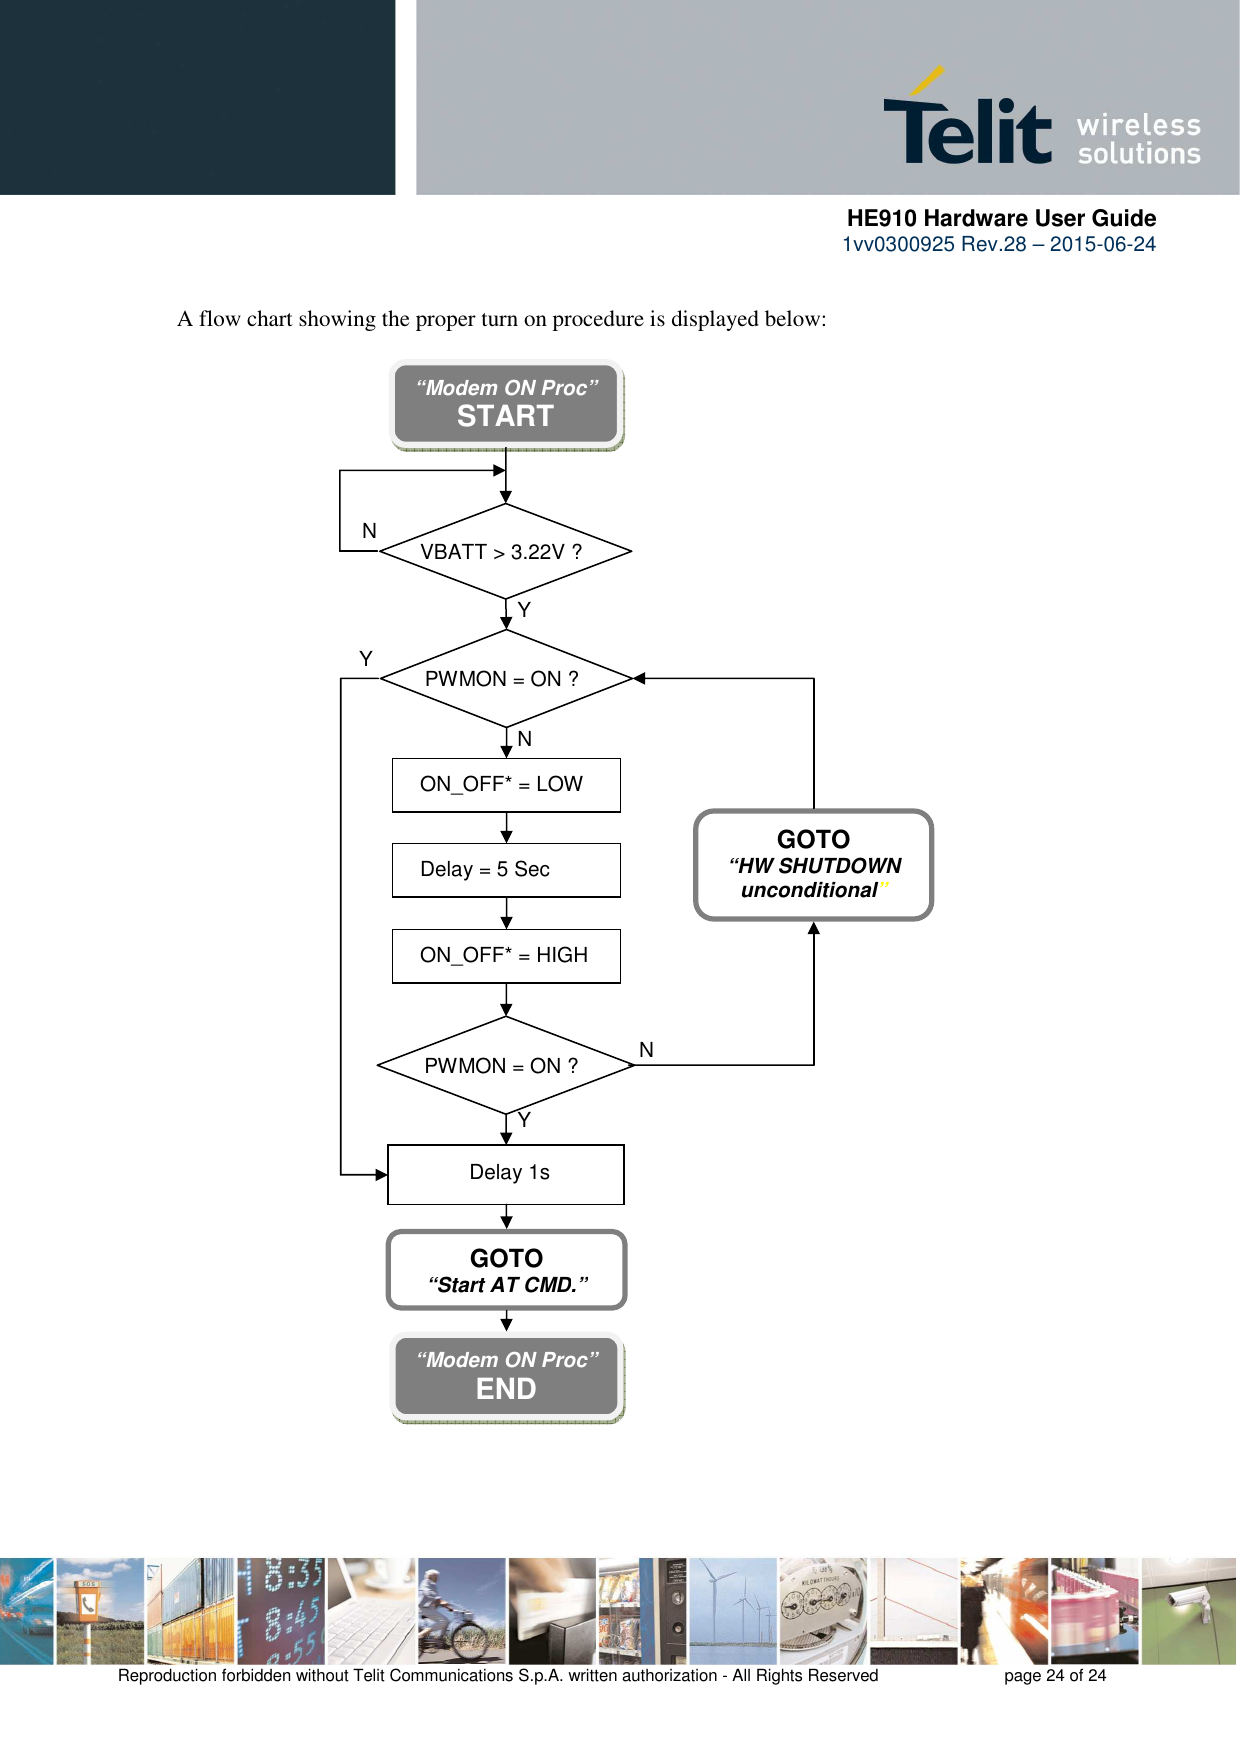      HE910 Hardware User Guide 1vv0300925 Rev.28 – 2015-06-24    Reproduction forbidden without Telit Communications S.p.A. written authorization - All Rights Reserved    page 24 of 24   A flow chart showing the proper turn on procedure is displayed below:        “Modem ON Proc” START Y Y GOTO “HW SHUTDOWN unconditional”  GOTO “Start AT CMD.” N PWMON = ON ? PWMON = ON ? N Delay 1s ON_OFF* = LOW Delay = 5 Sec ON_OFF* = HIGH “Modem ON Proc” END VBATT &gt; 3.22V ?  Y N 